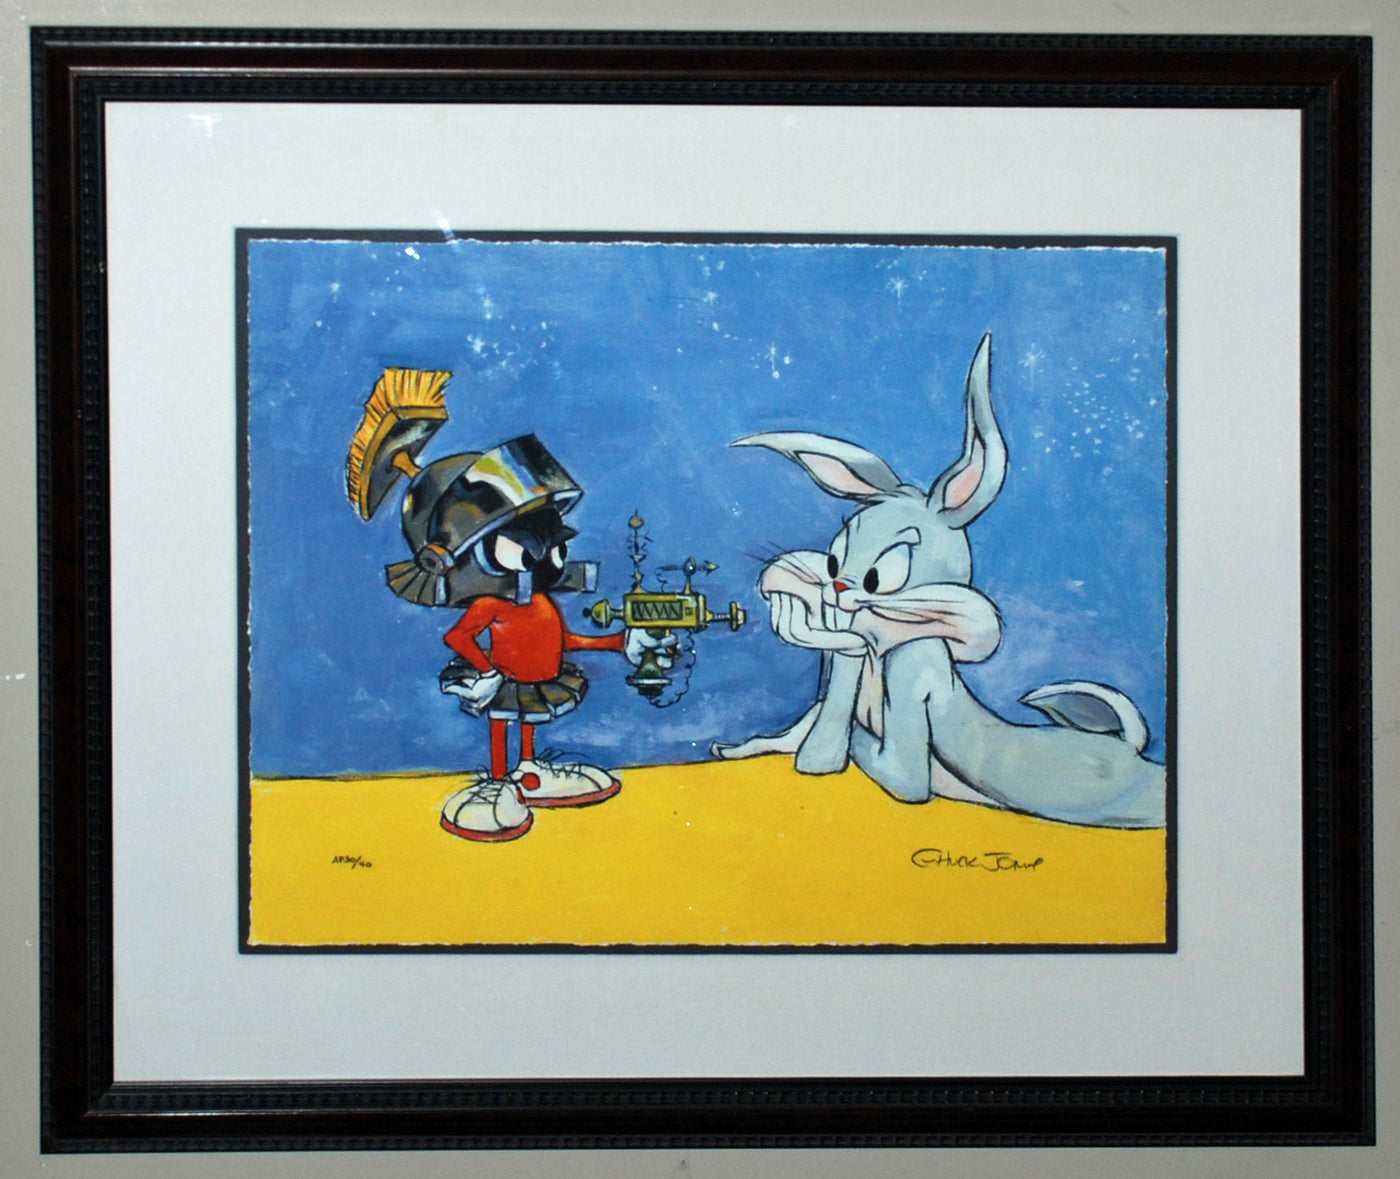 Original Warner Brothers Limited Edition Giclee Print, Invasion of the Bunny Snatchers